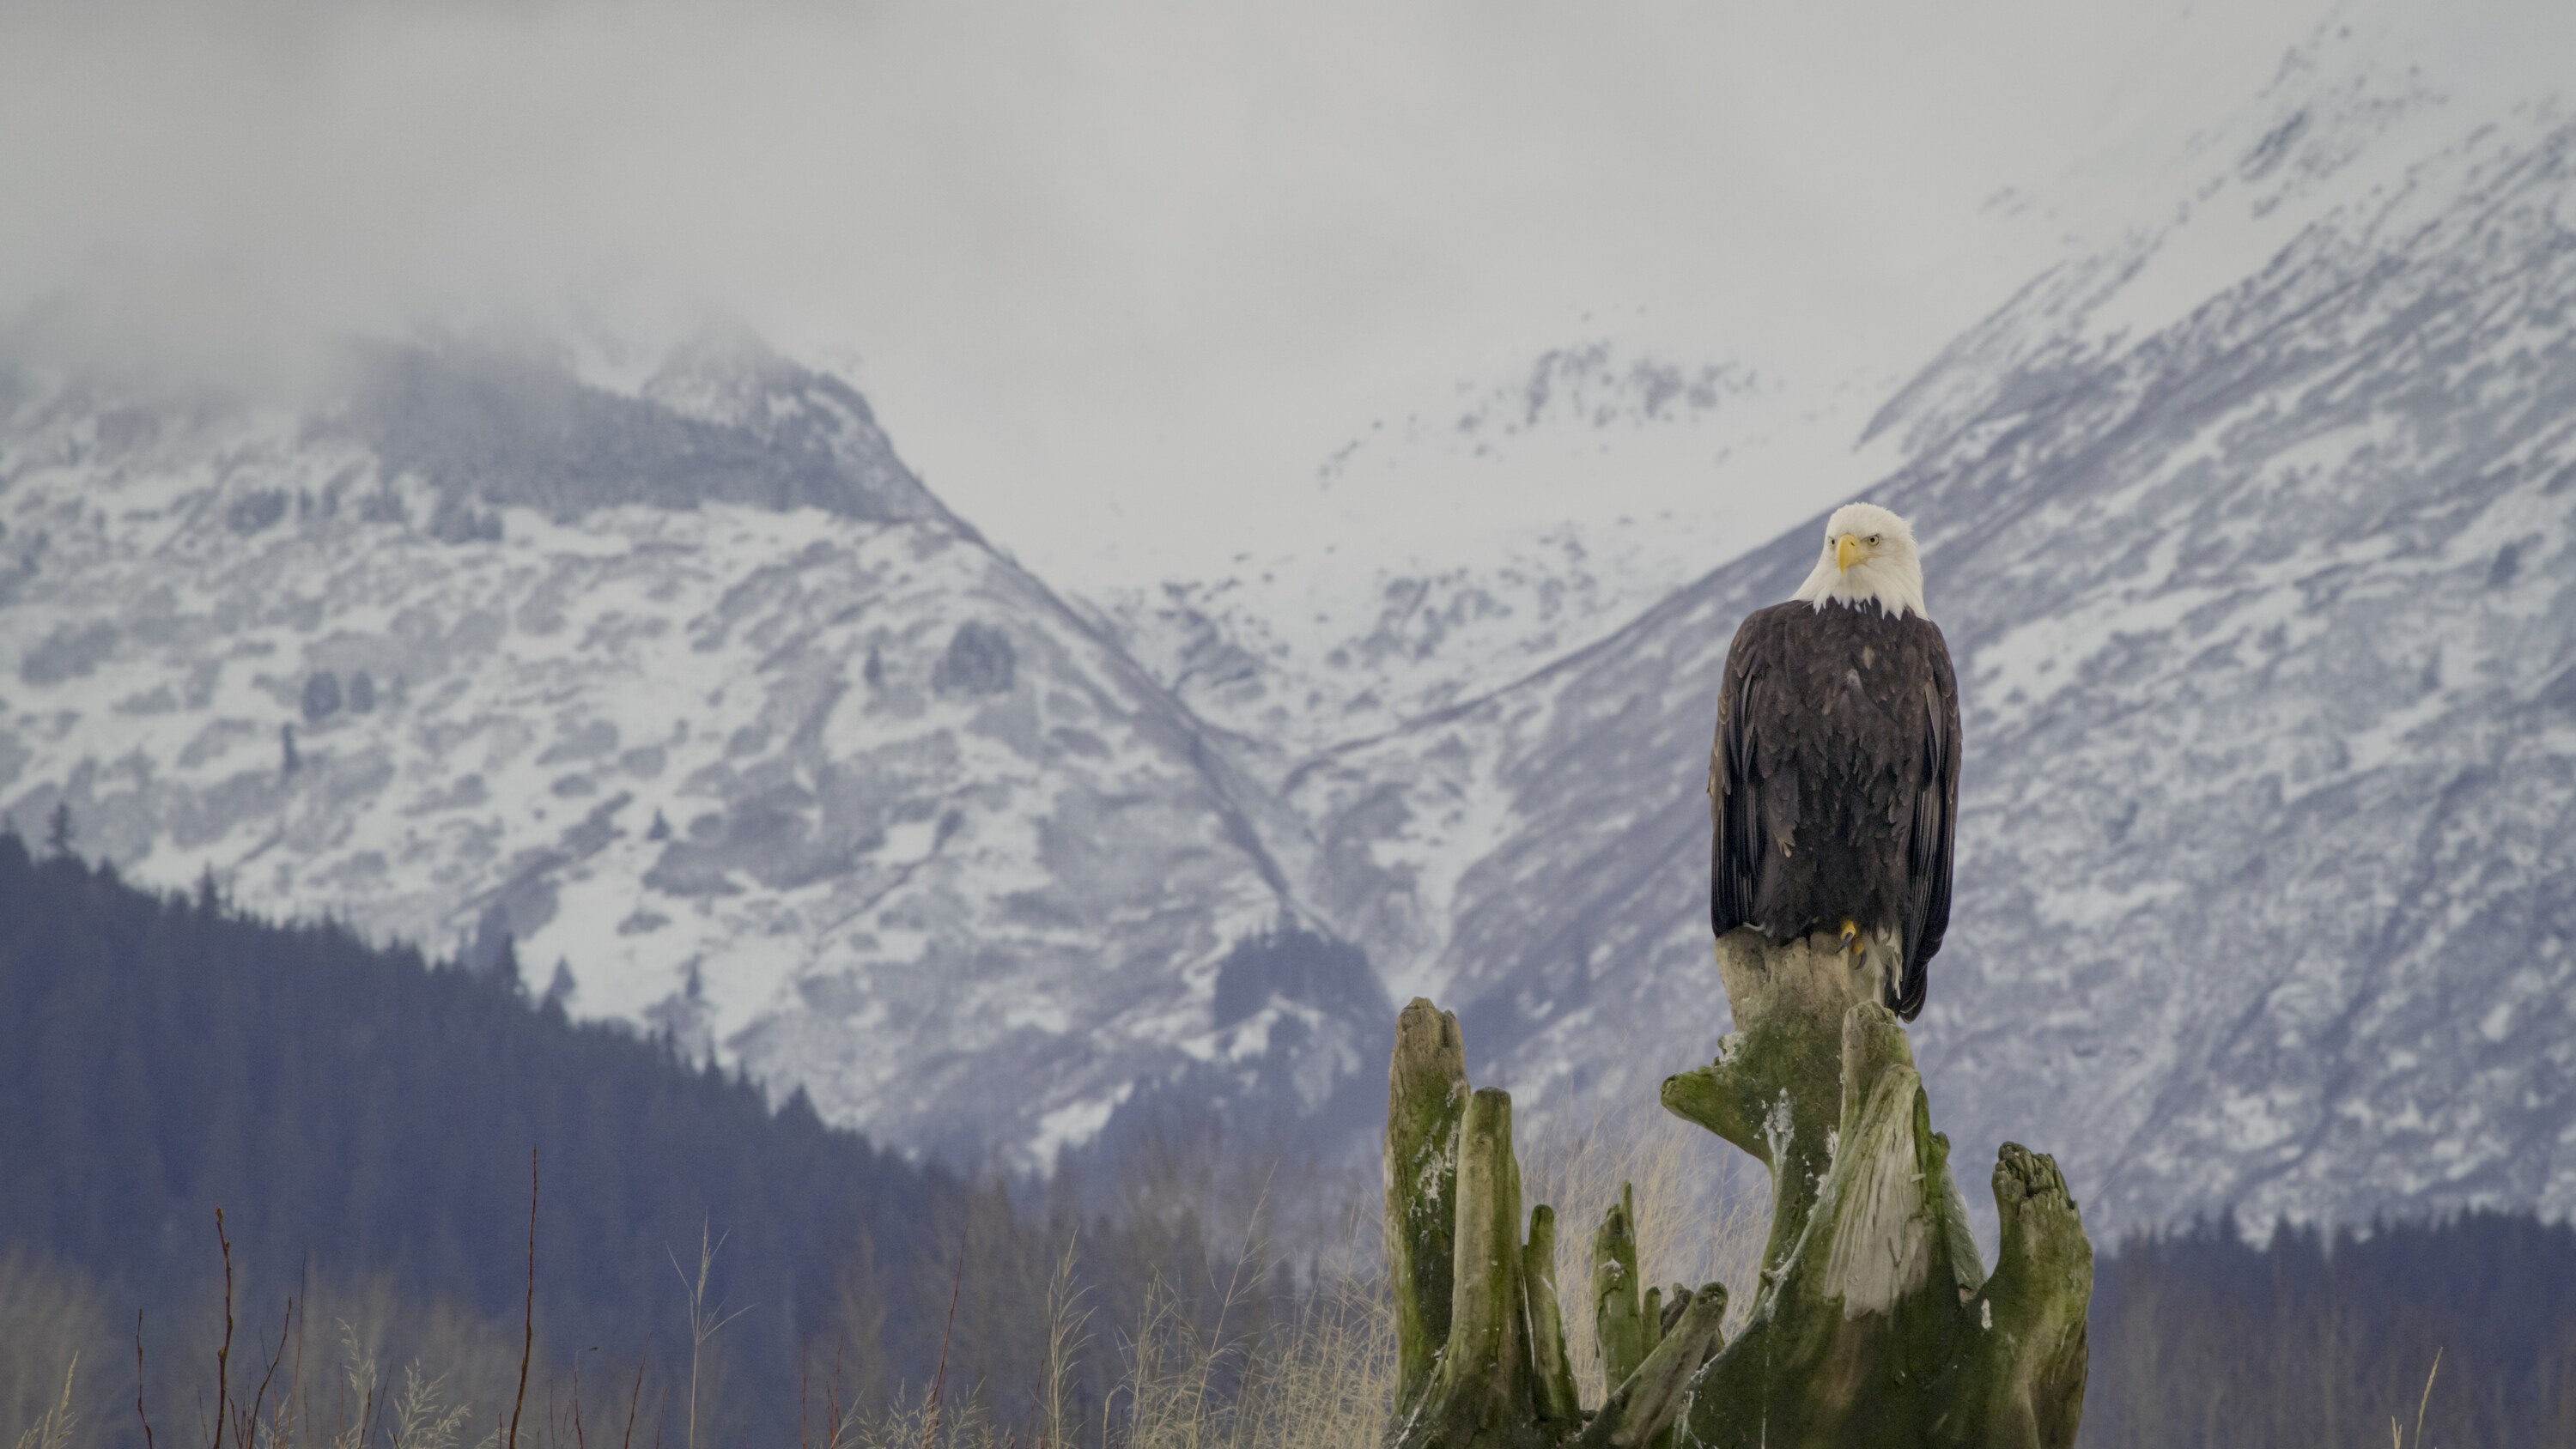 A bald eagle looks out for opportunities to feast on the late salmon run, enabled by warm water upwellings in Chilkat Bald Eagle Preserve. (National Geographic for Disney+)